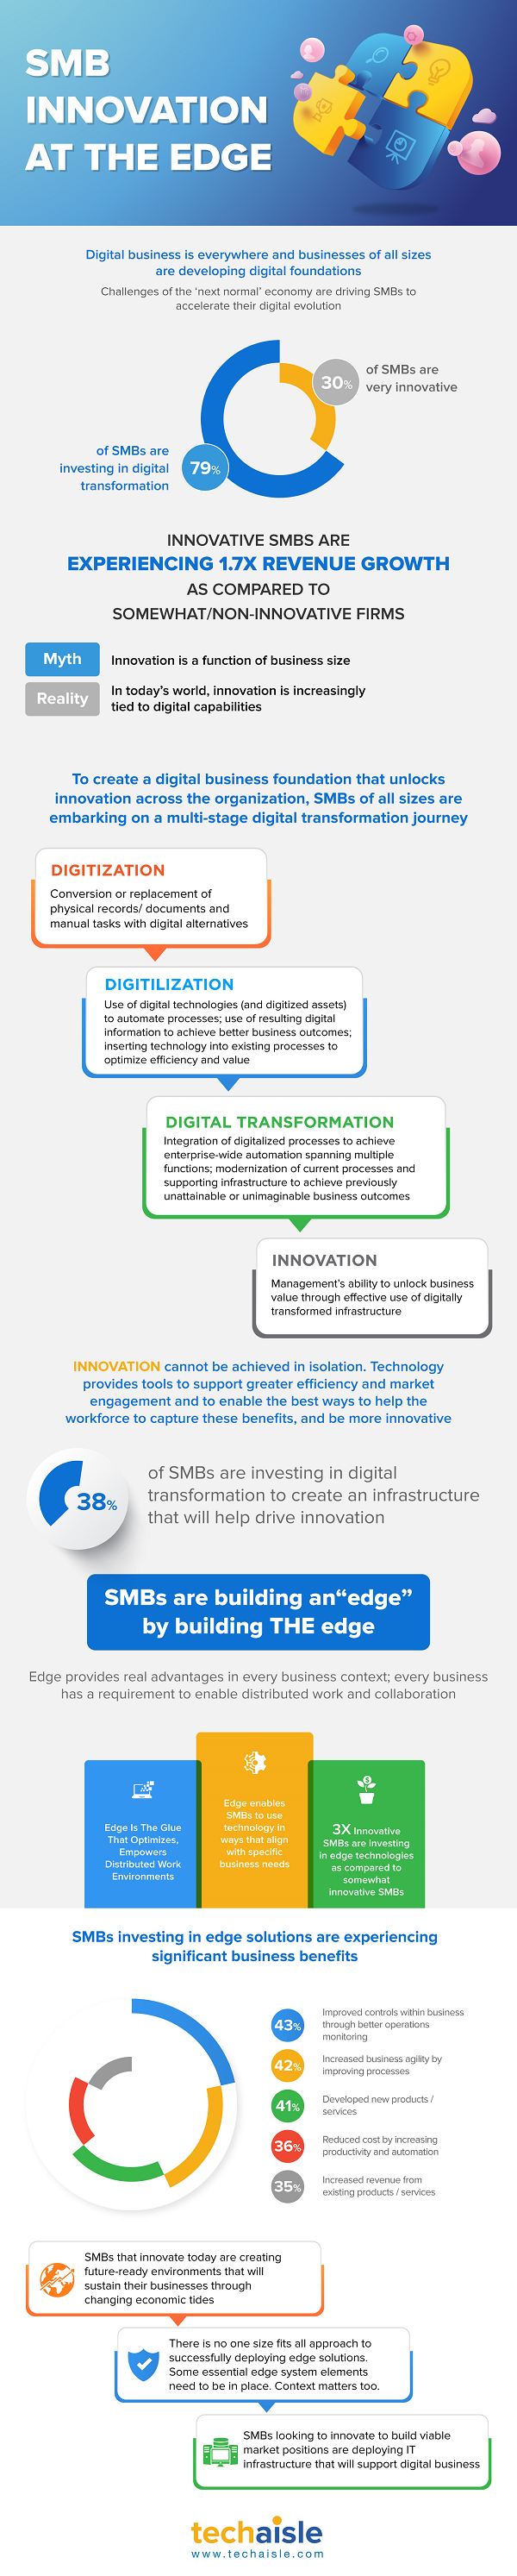 techaisle smb innovation at the edge infographic low res